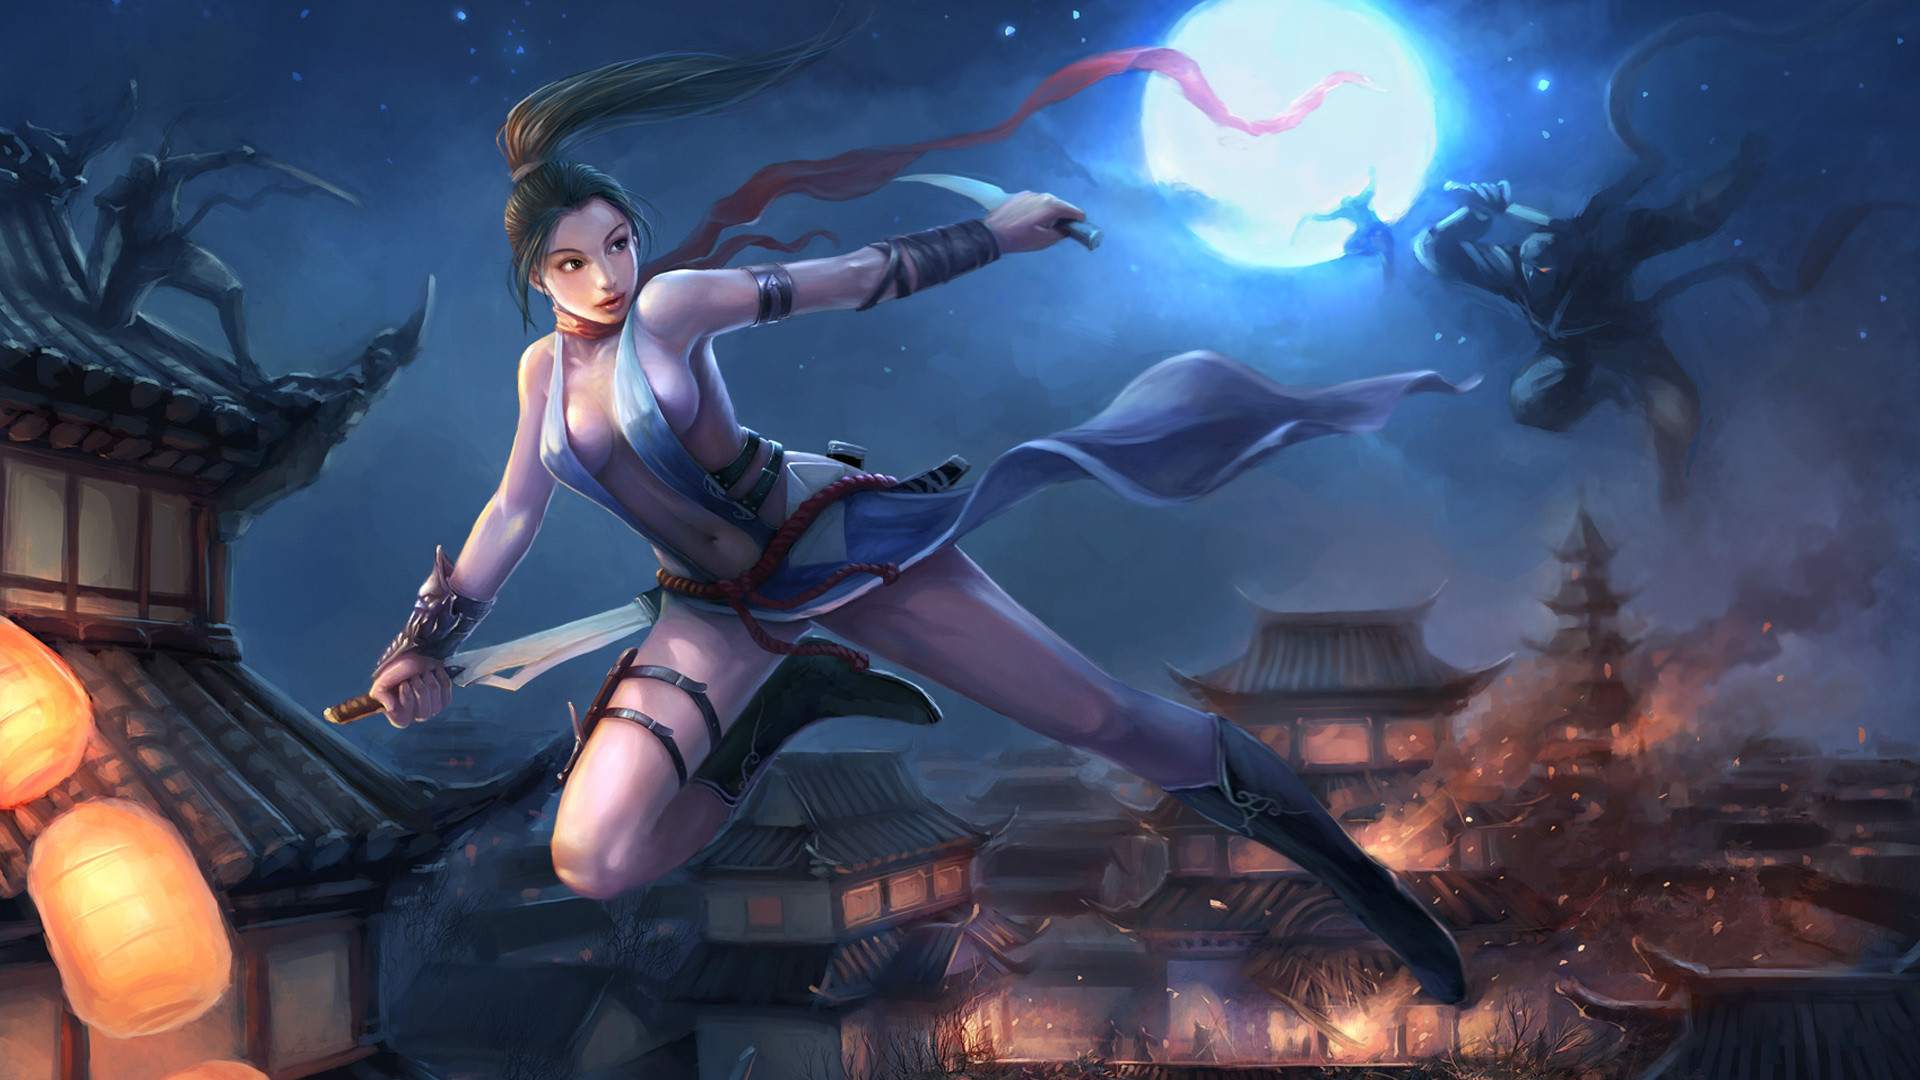 1920x1080 Ninja Girls wallpapers and images - wallpapers, pictures, photos